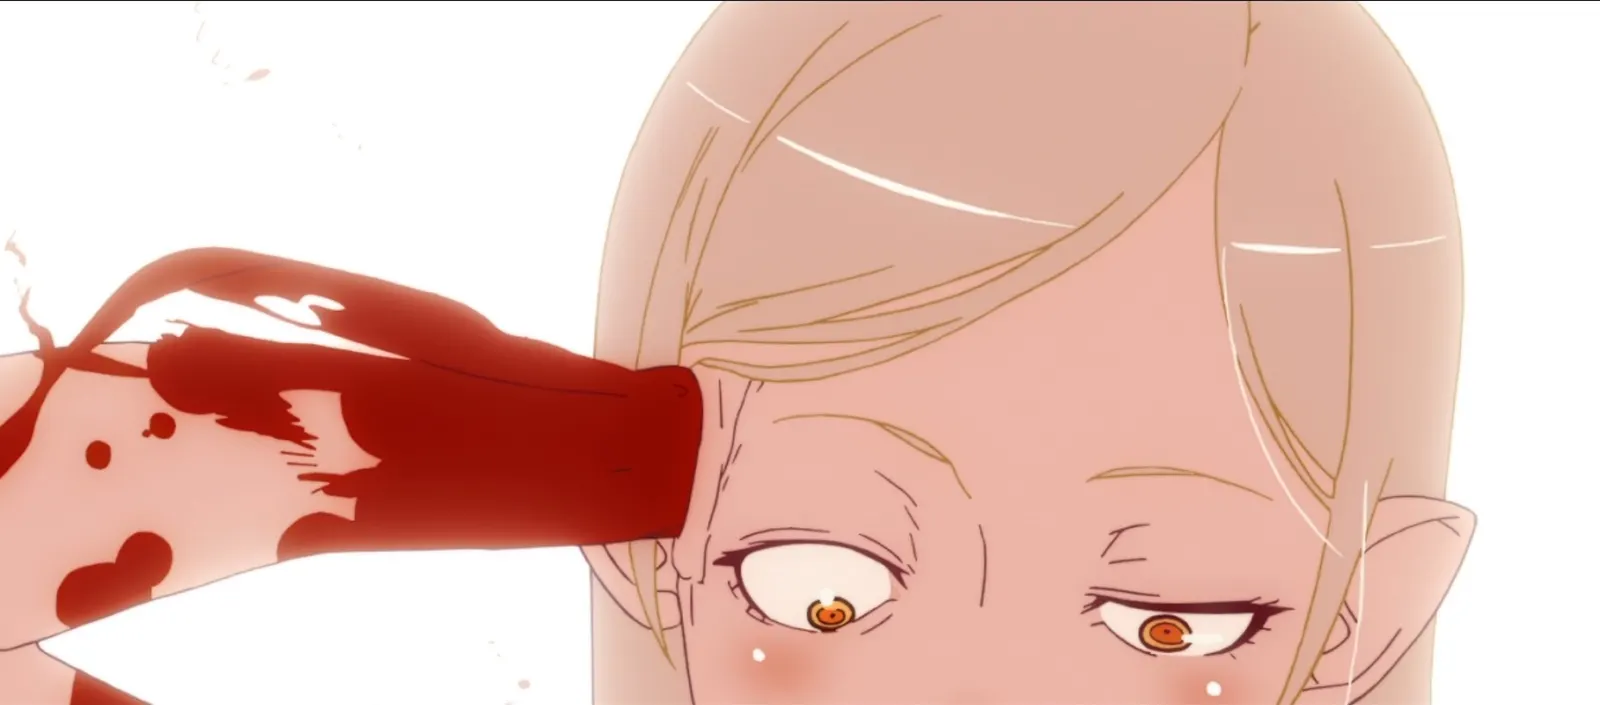 Kiss-shot has a very... special way of retrieving repressed memories. Make sure you don’t forget to return to read my part 3 review soon, or I might send her to helpfully rearrange your brain!